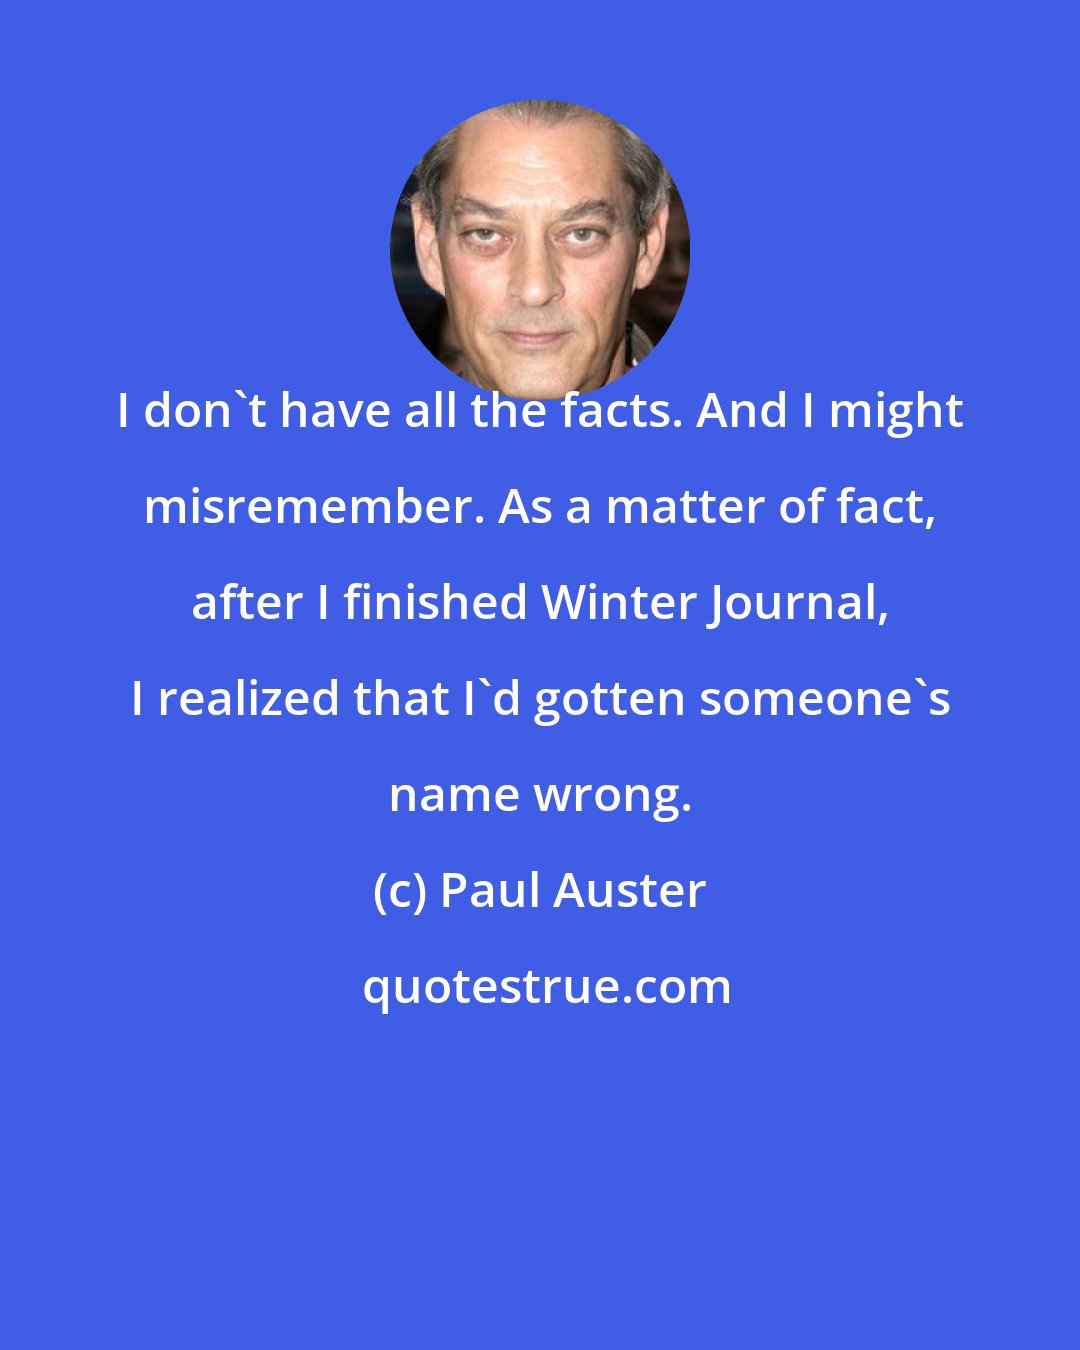 Paul Auster: I don't have all the facts. And I might misremember. As a matter of fact, after I finished Winter Journal, I realized that I'd gotten someone's name wrong.